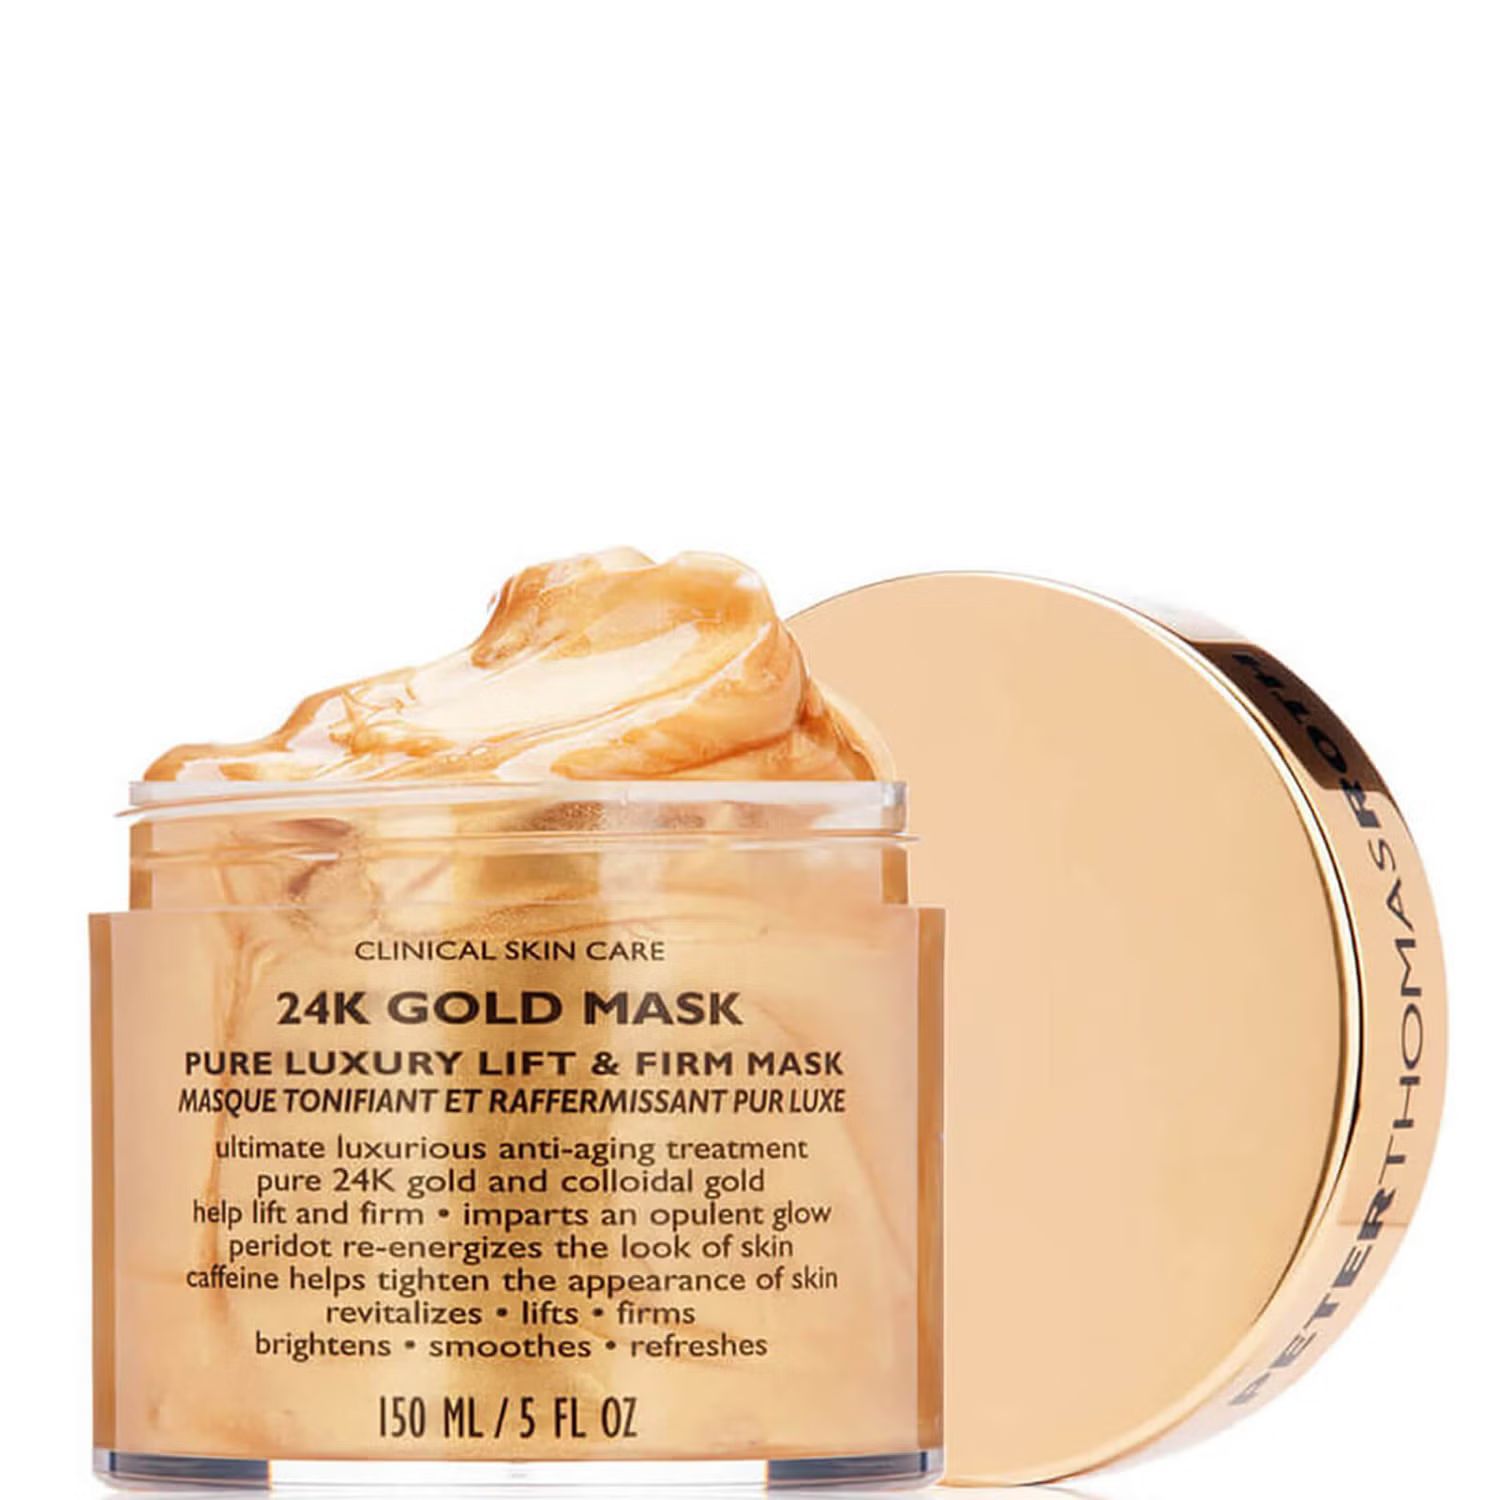 Peter Thomas Roth 24K Gold Pure Luxury Lift Firm Mask (5 fl. oz.) | Dermstore (US)